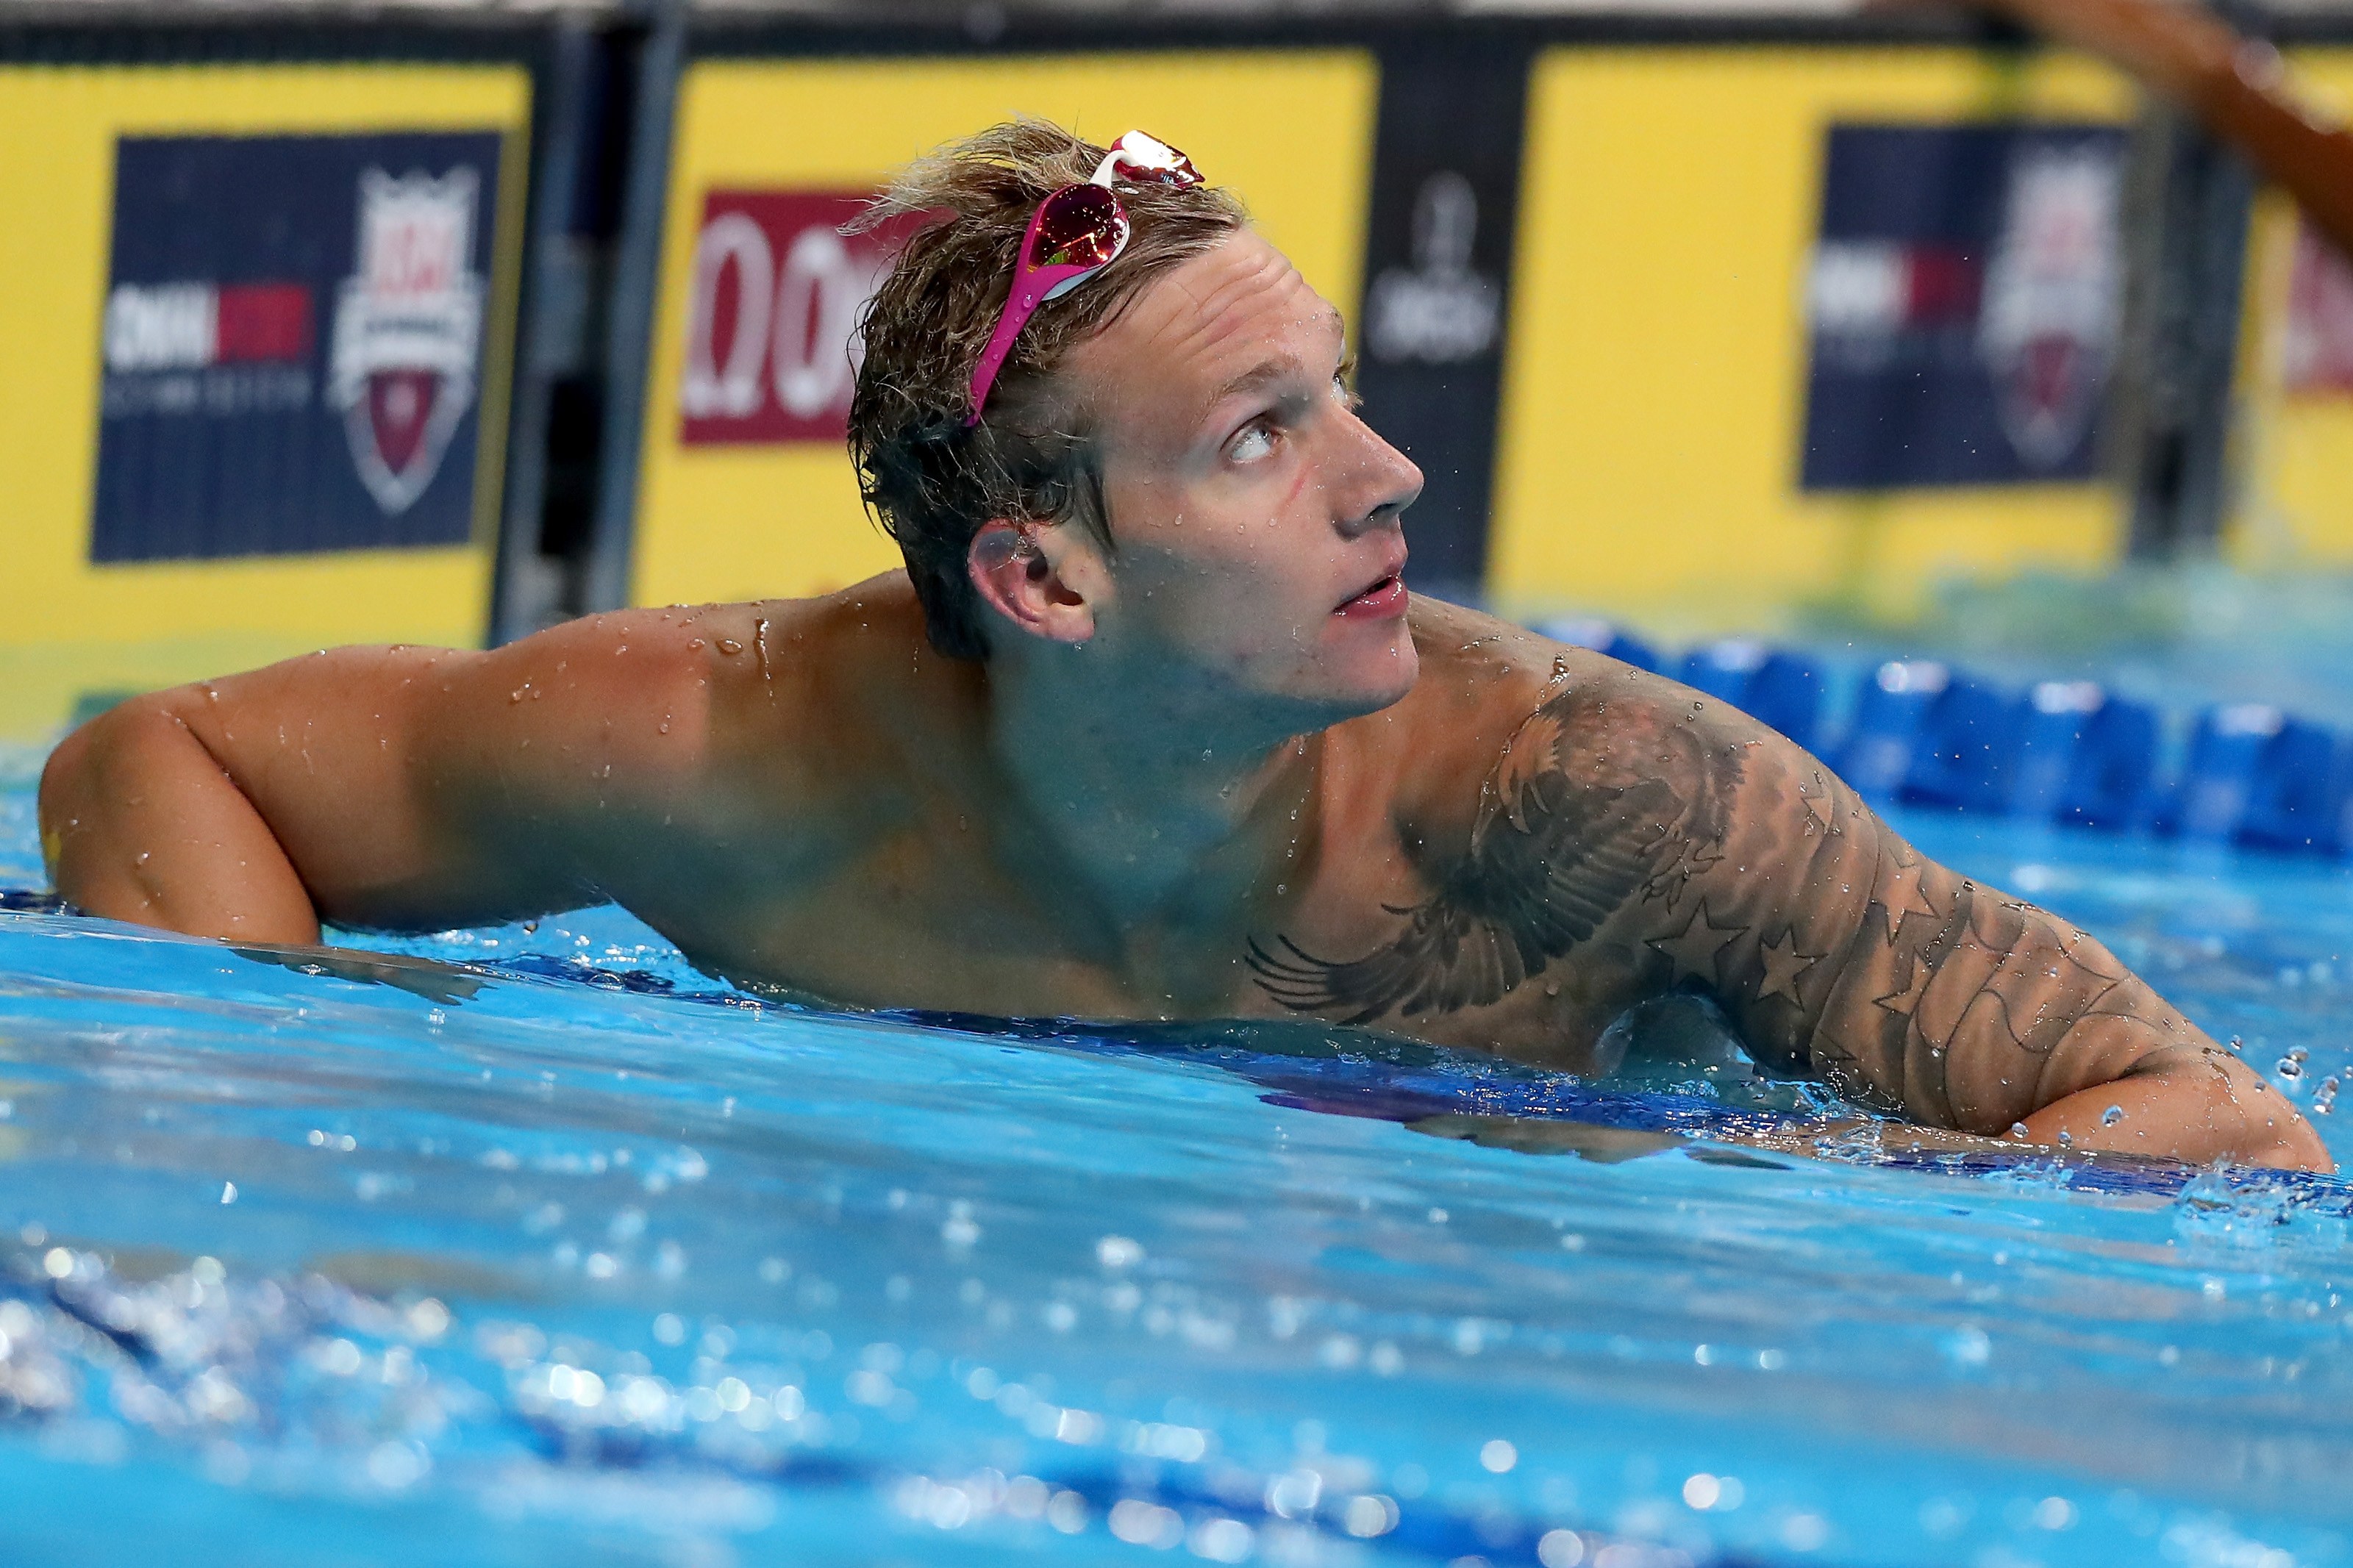 Here's What You Need to Know About Olympic Swimmer Caeleb Dressel ...